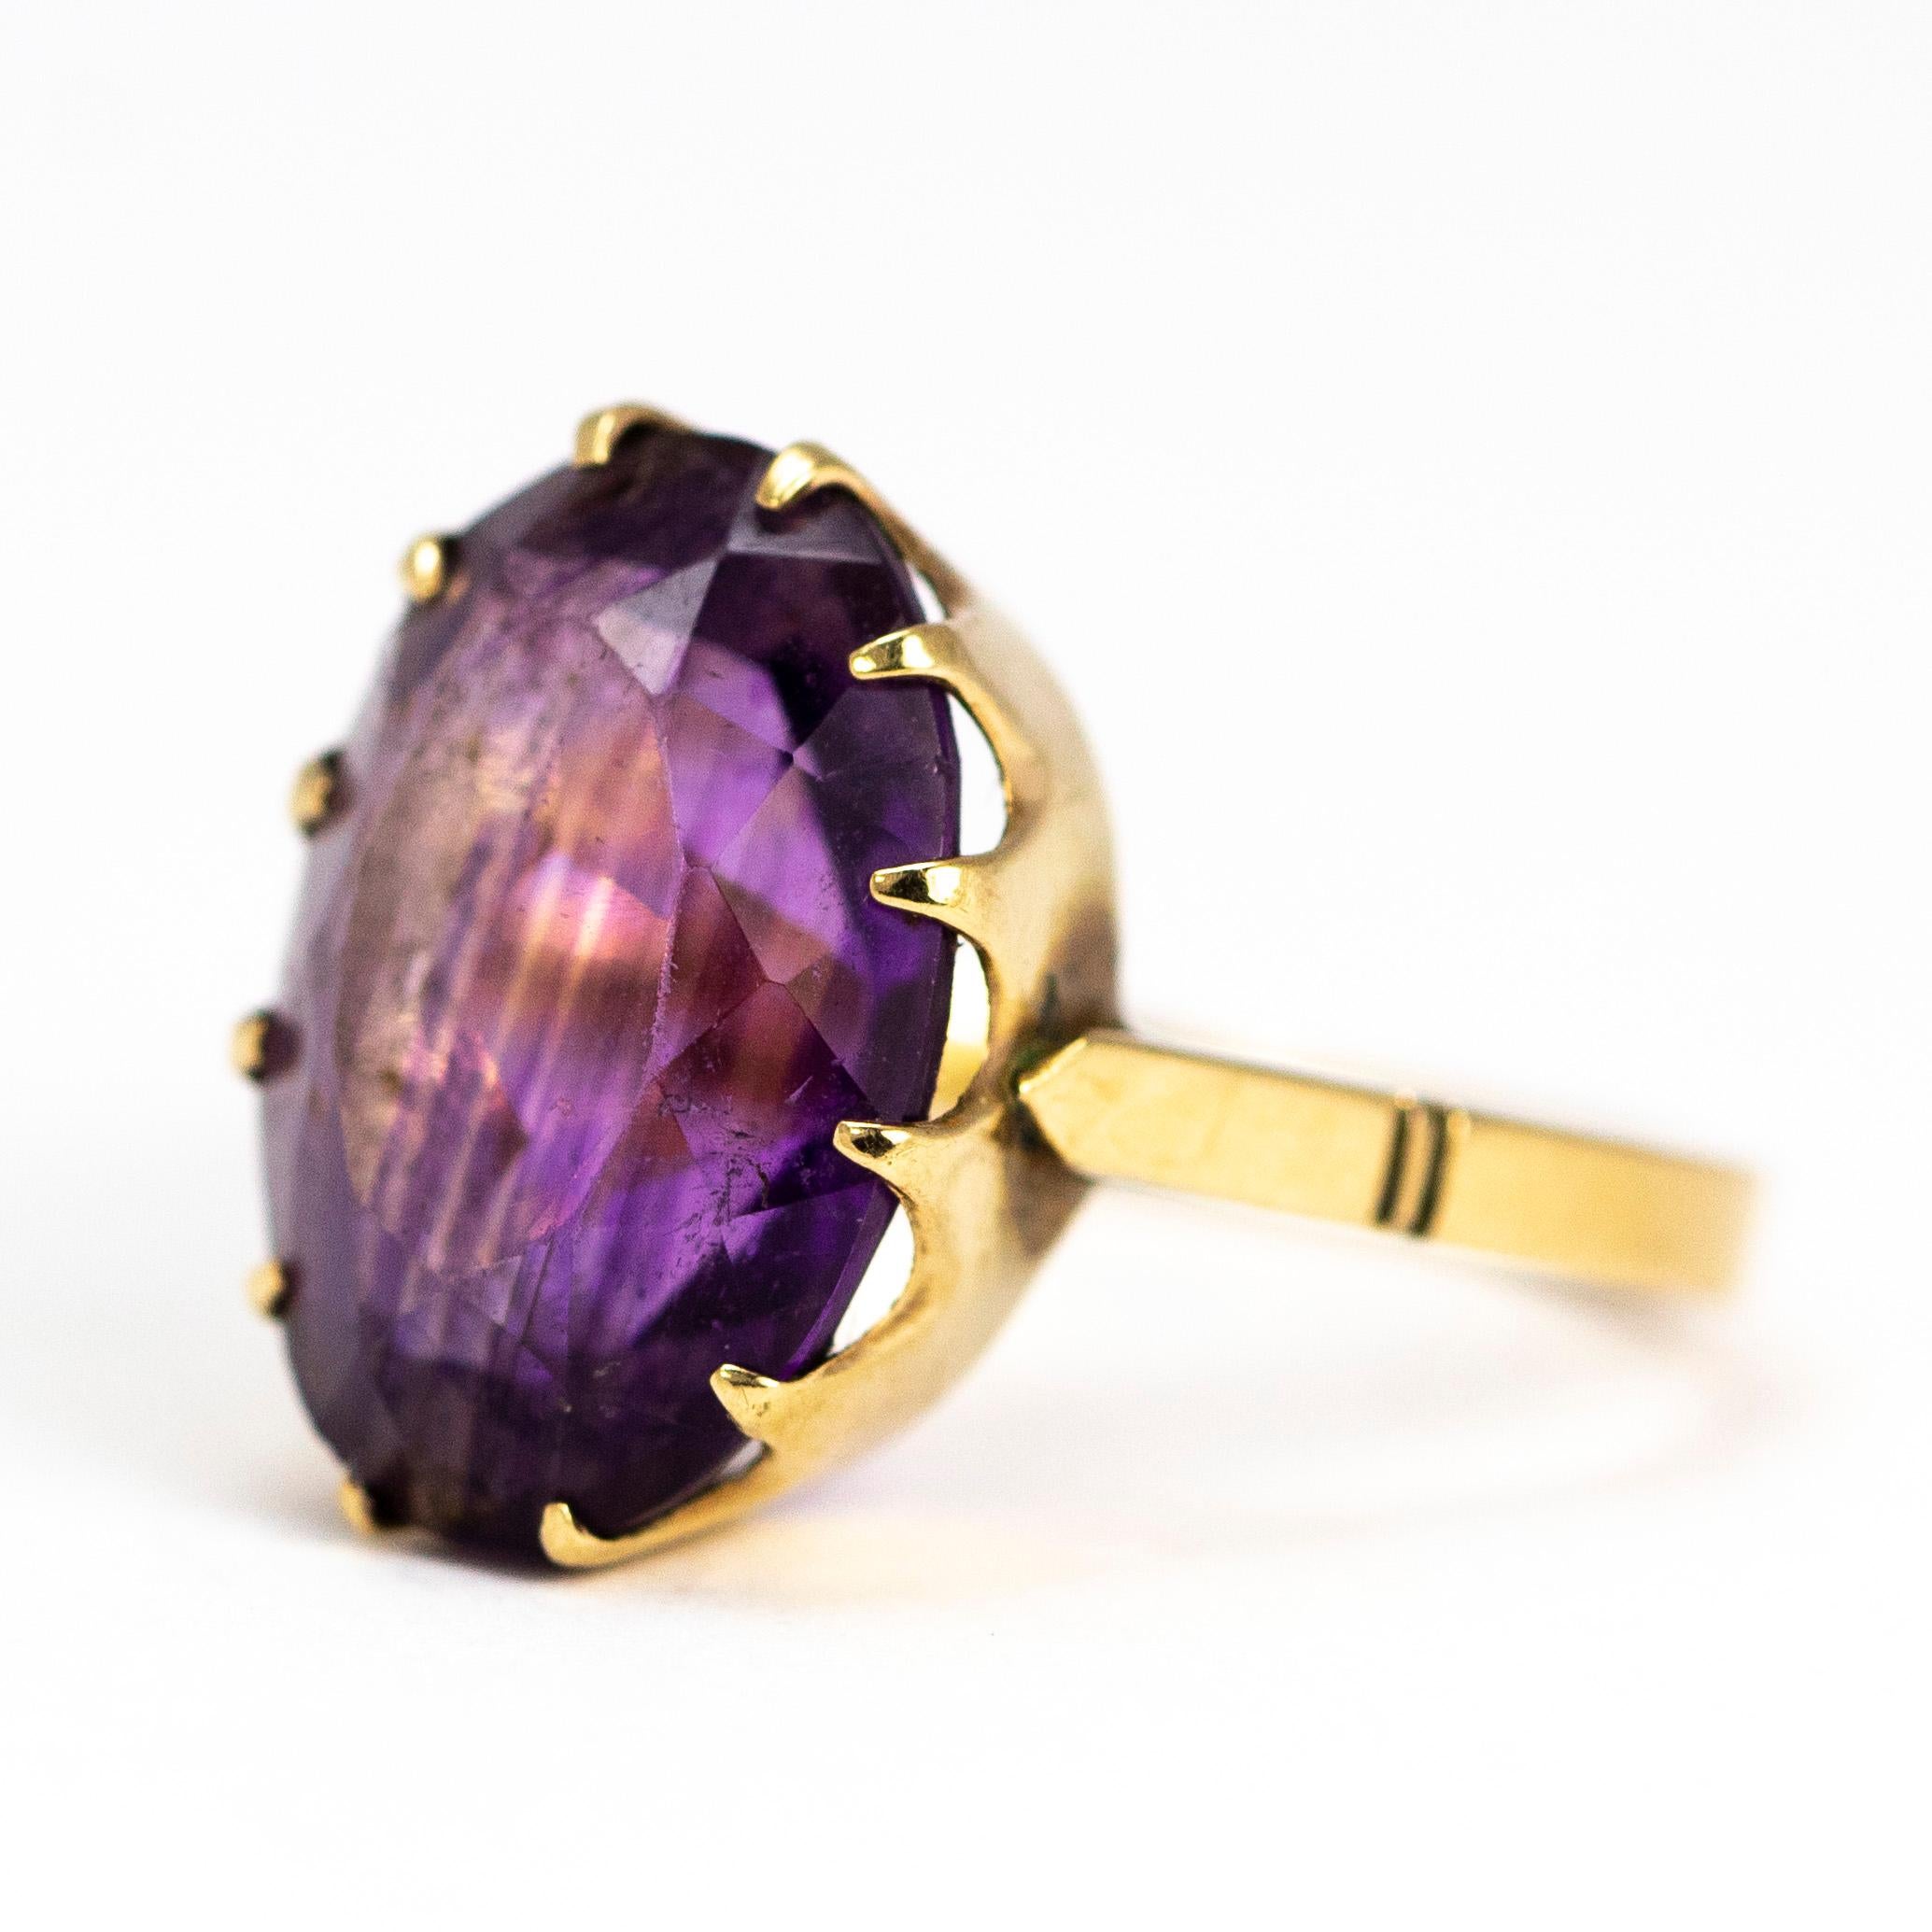 The striking purple of the amethyst in this simple cocktail ring is stunning. The stone is set in simple claws which hold al around the stone. 

Ring Size: J 1/2 or 5 
Stone Dimensions: 14 x 10mm 

Weight: 2.7g